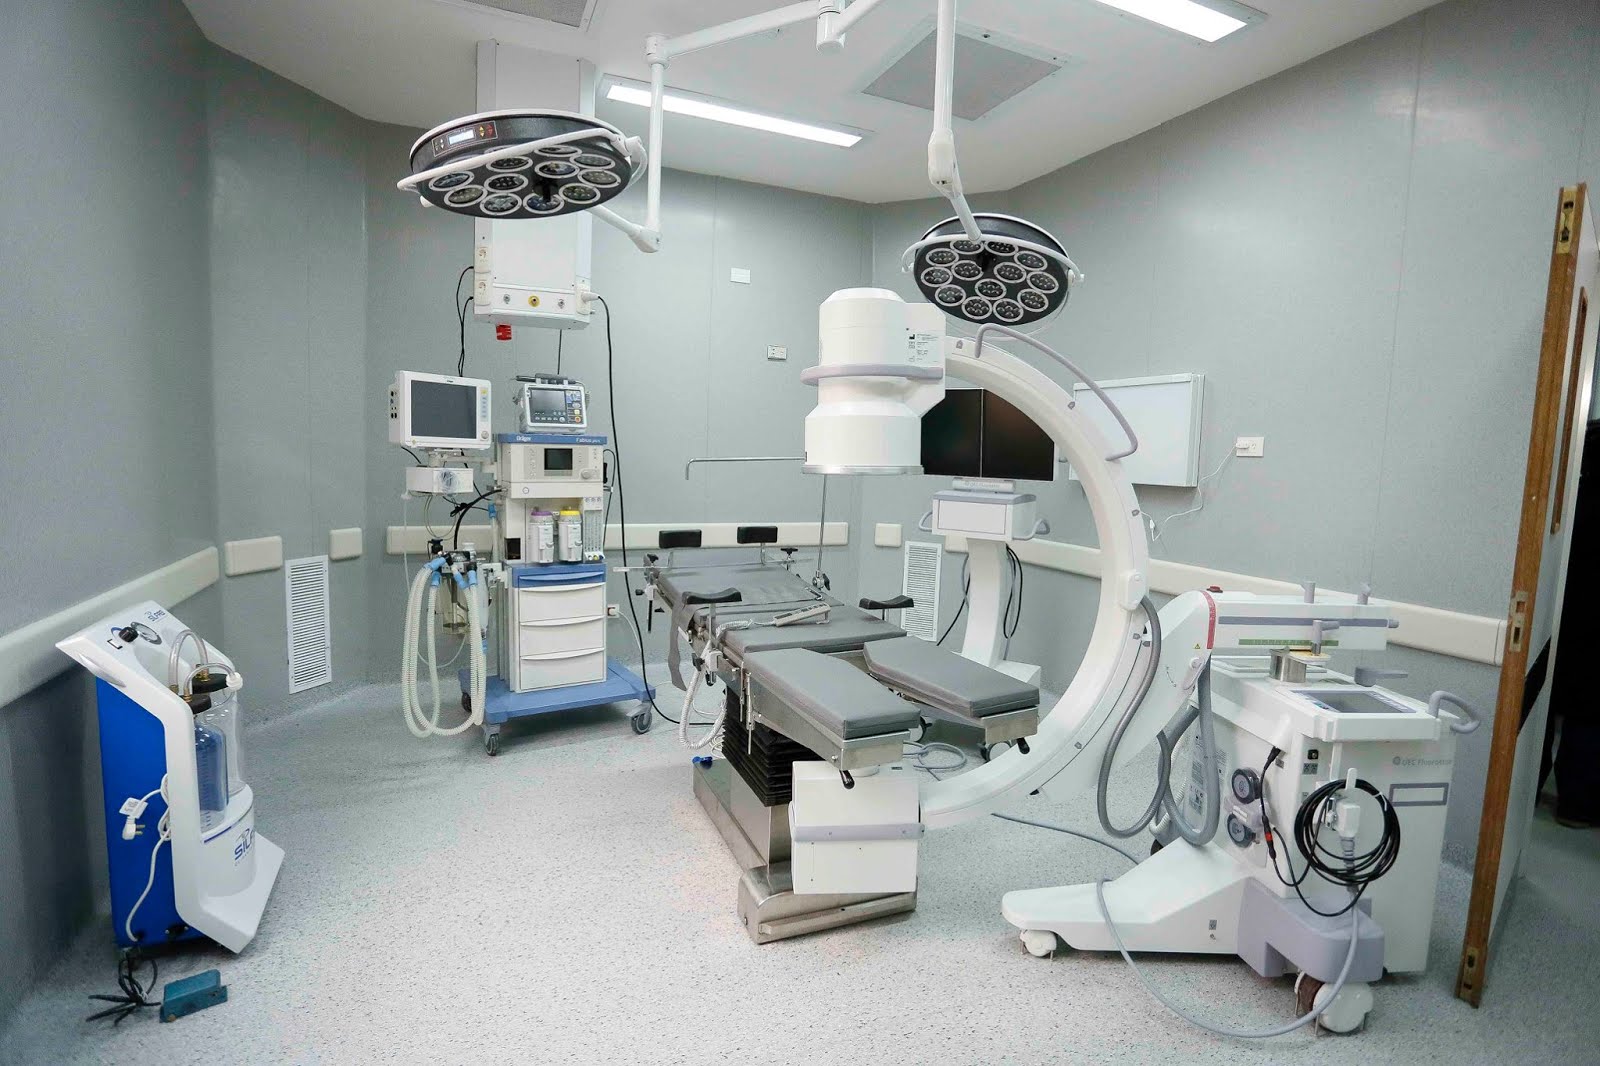 The New Surgery Room at a Public Hospital Overseas.